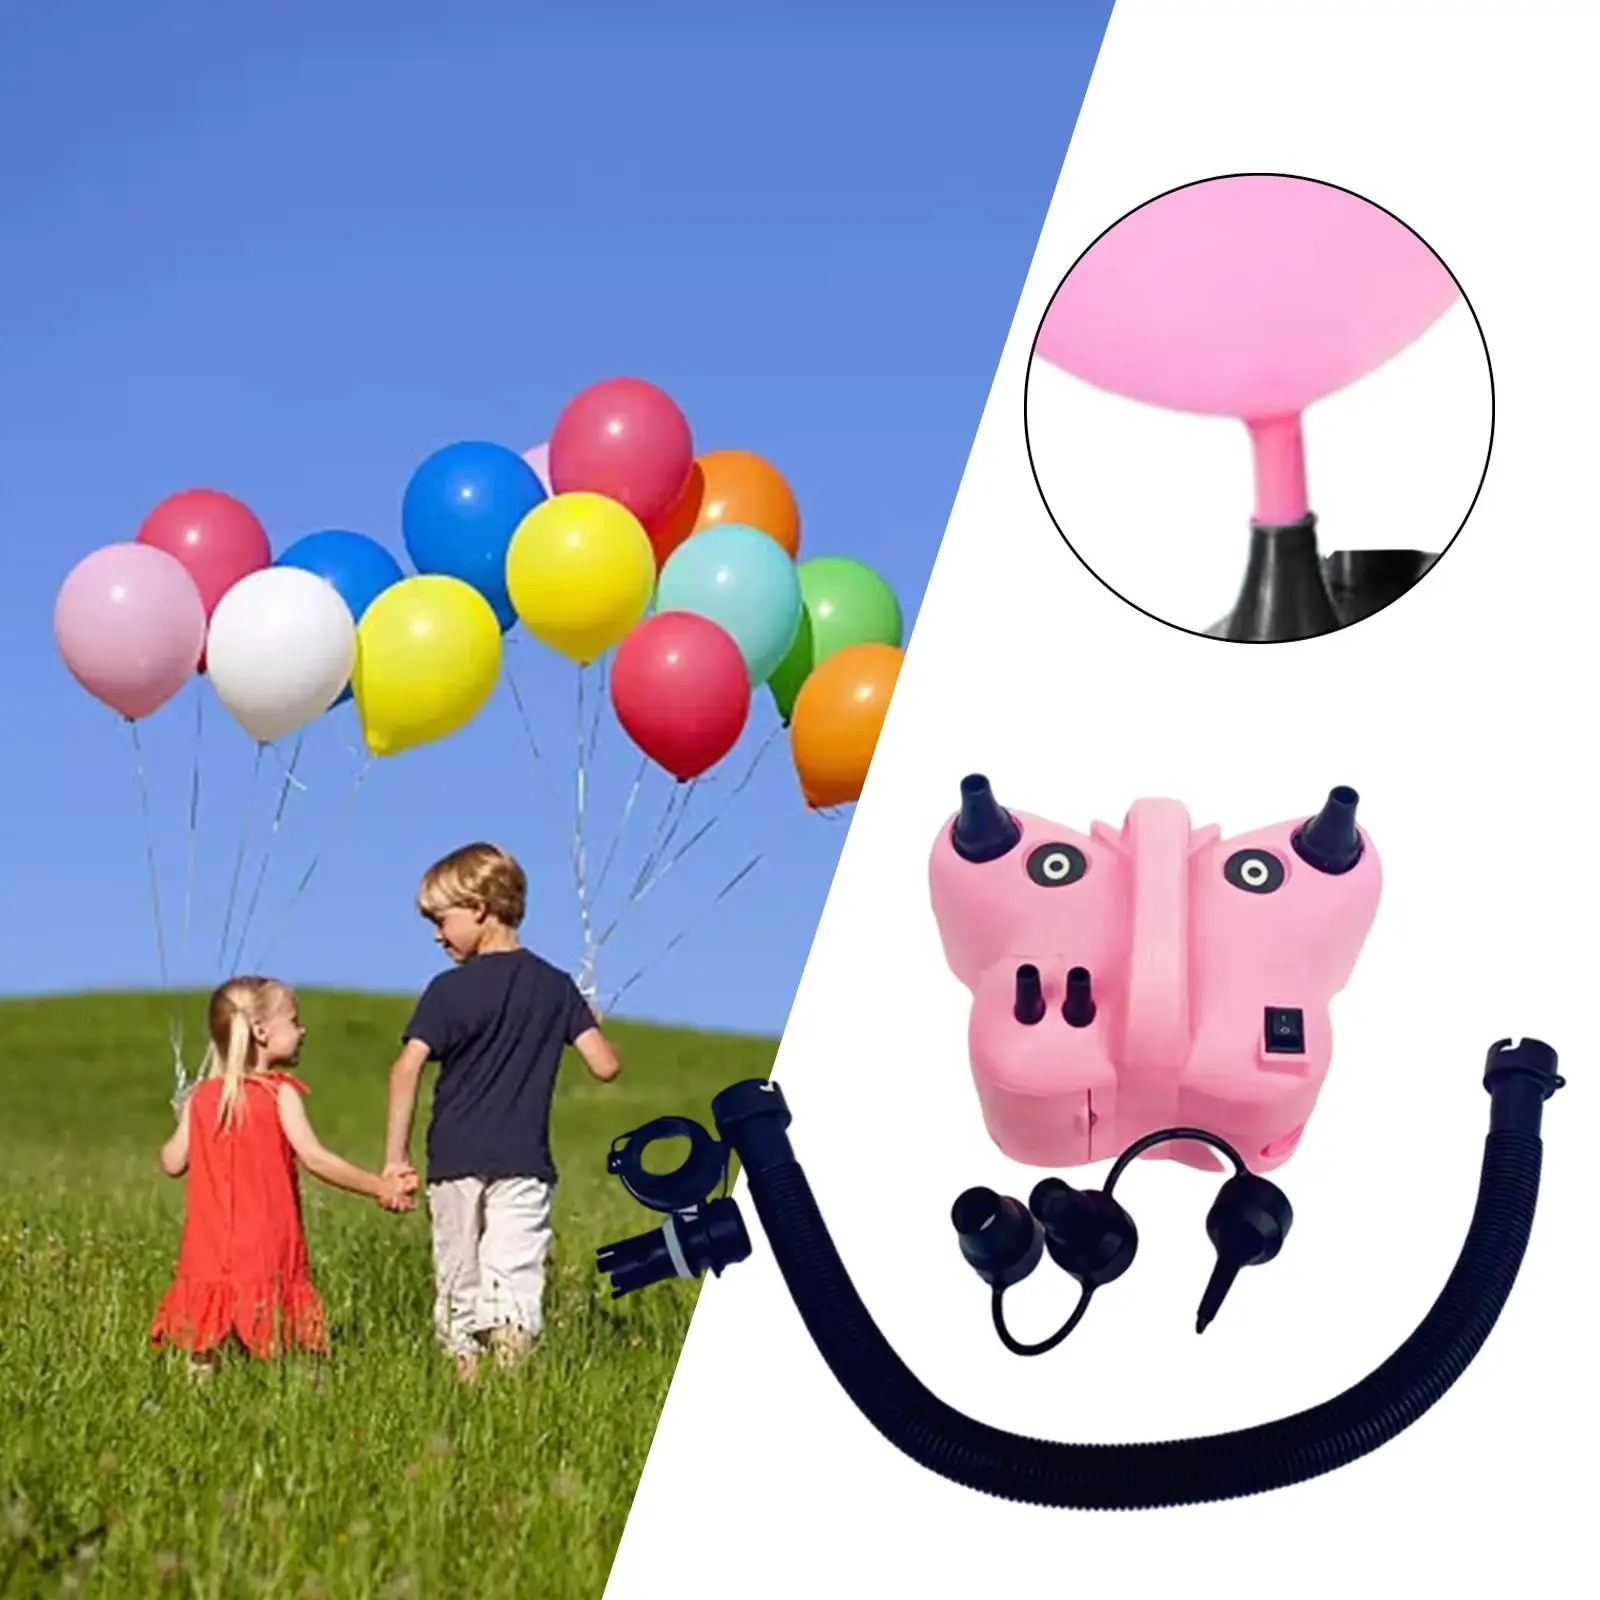 Portable Electric Balloon Inflator Pump Manual and Automatic Pumping Mode for Ballon Arch Garland Rubber Boat Floating Tube